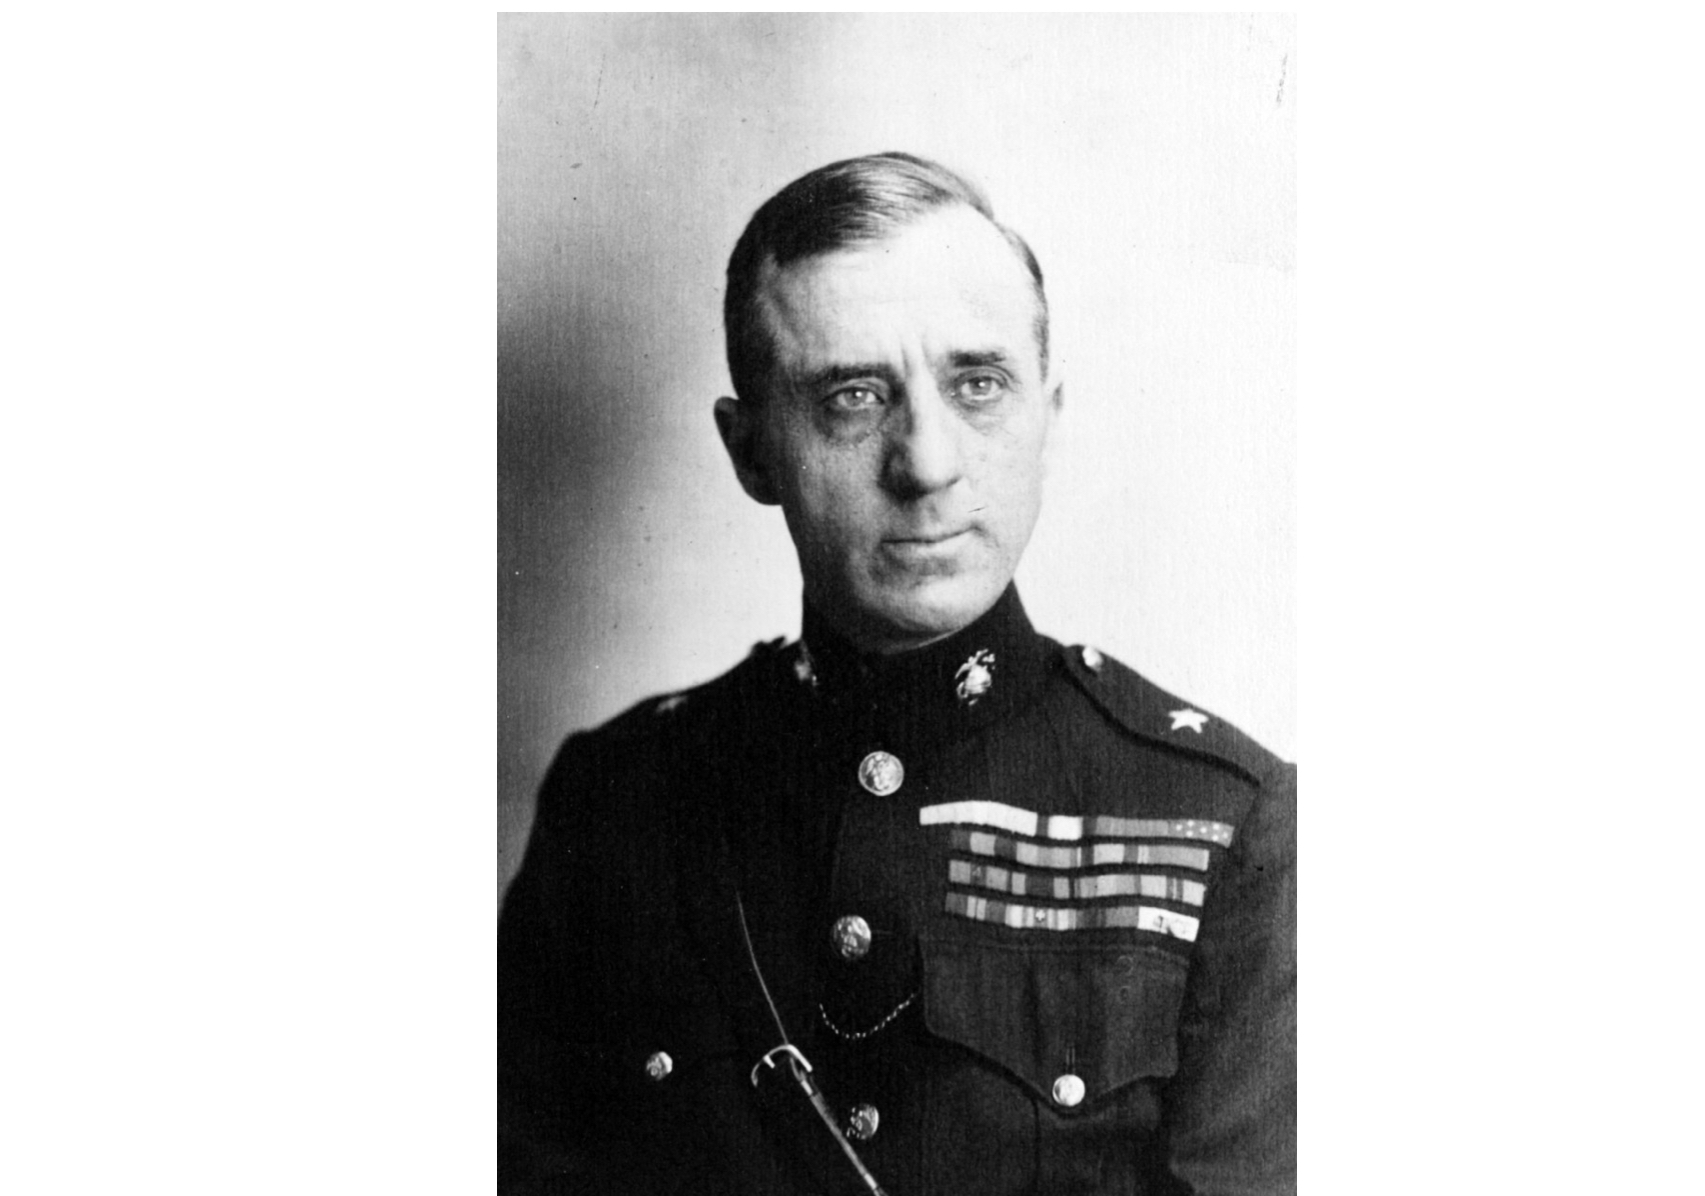 smedley butler military industrial complex